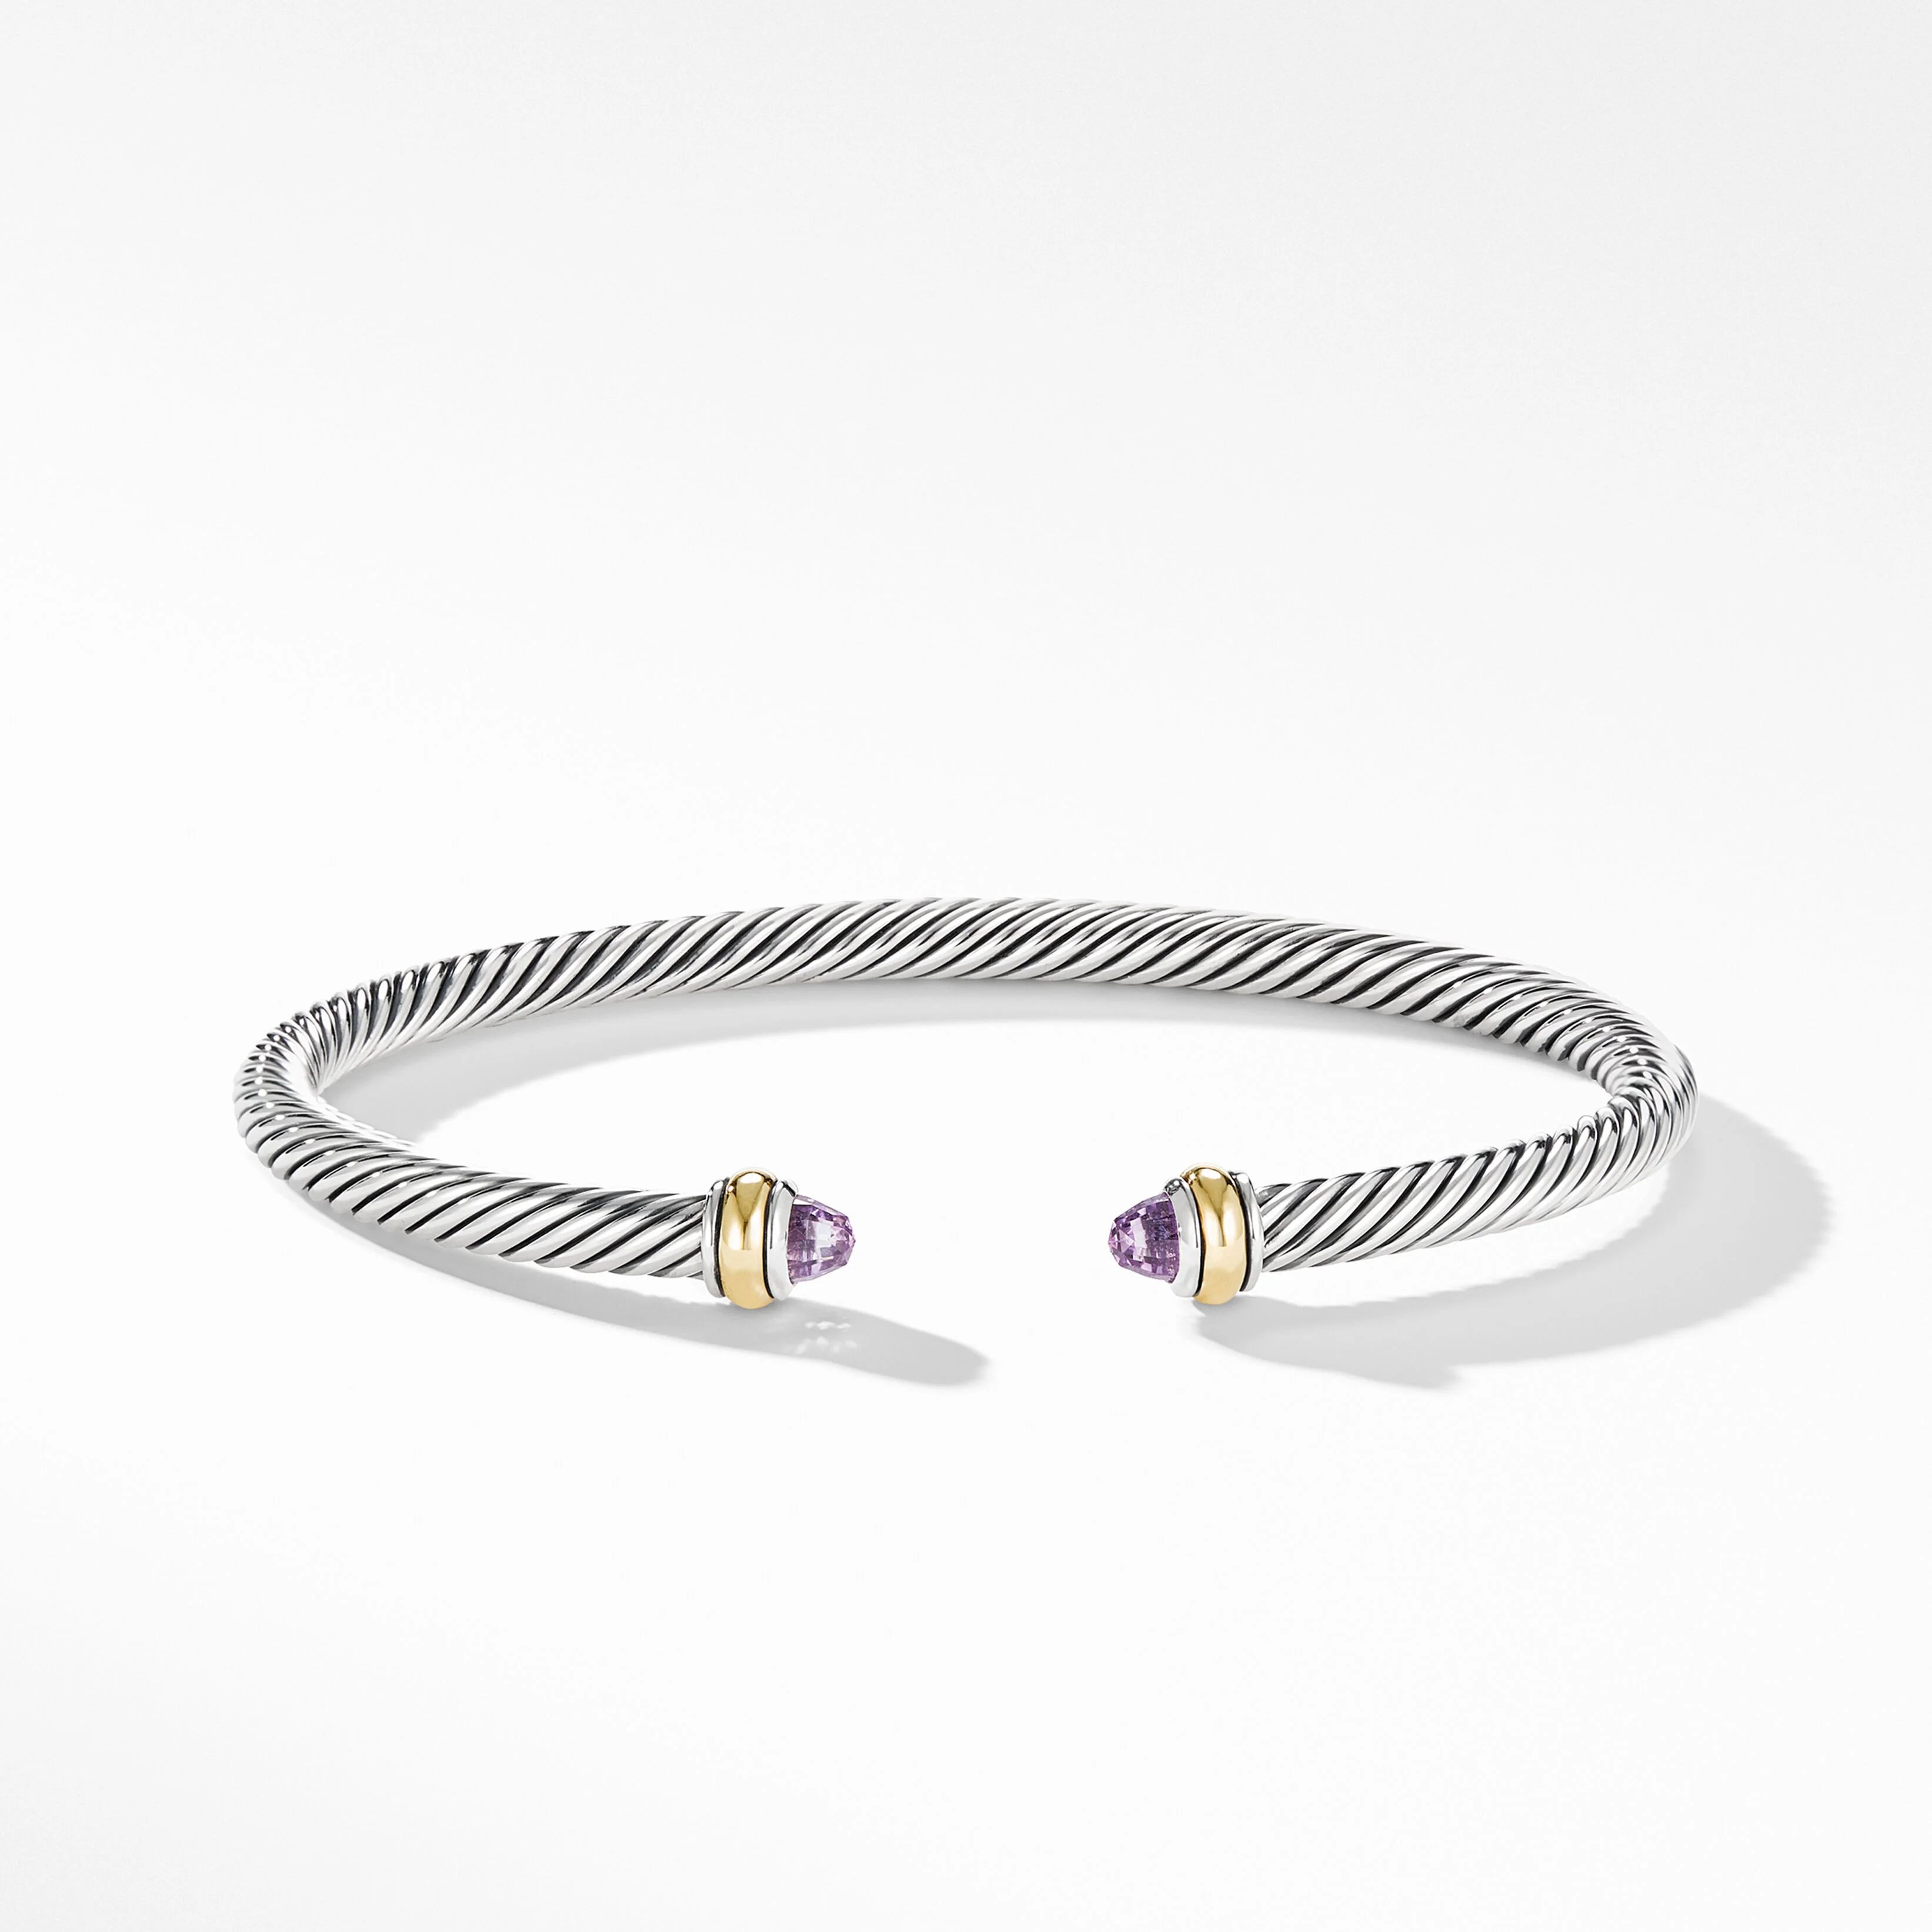 Cable Classics Bracelet in Sterling Silver with Amethyst and 18K Yellow Gold | David Yurman